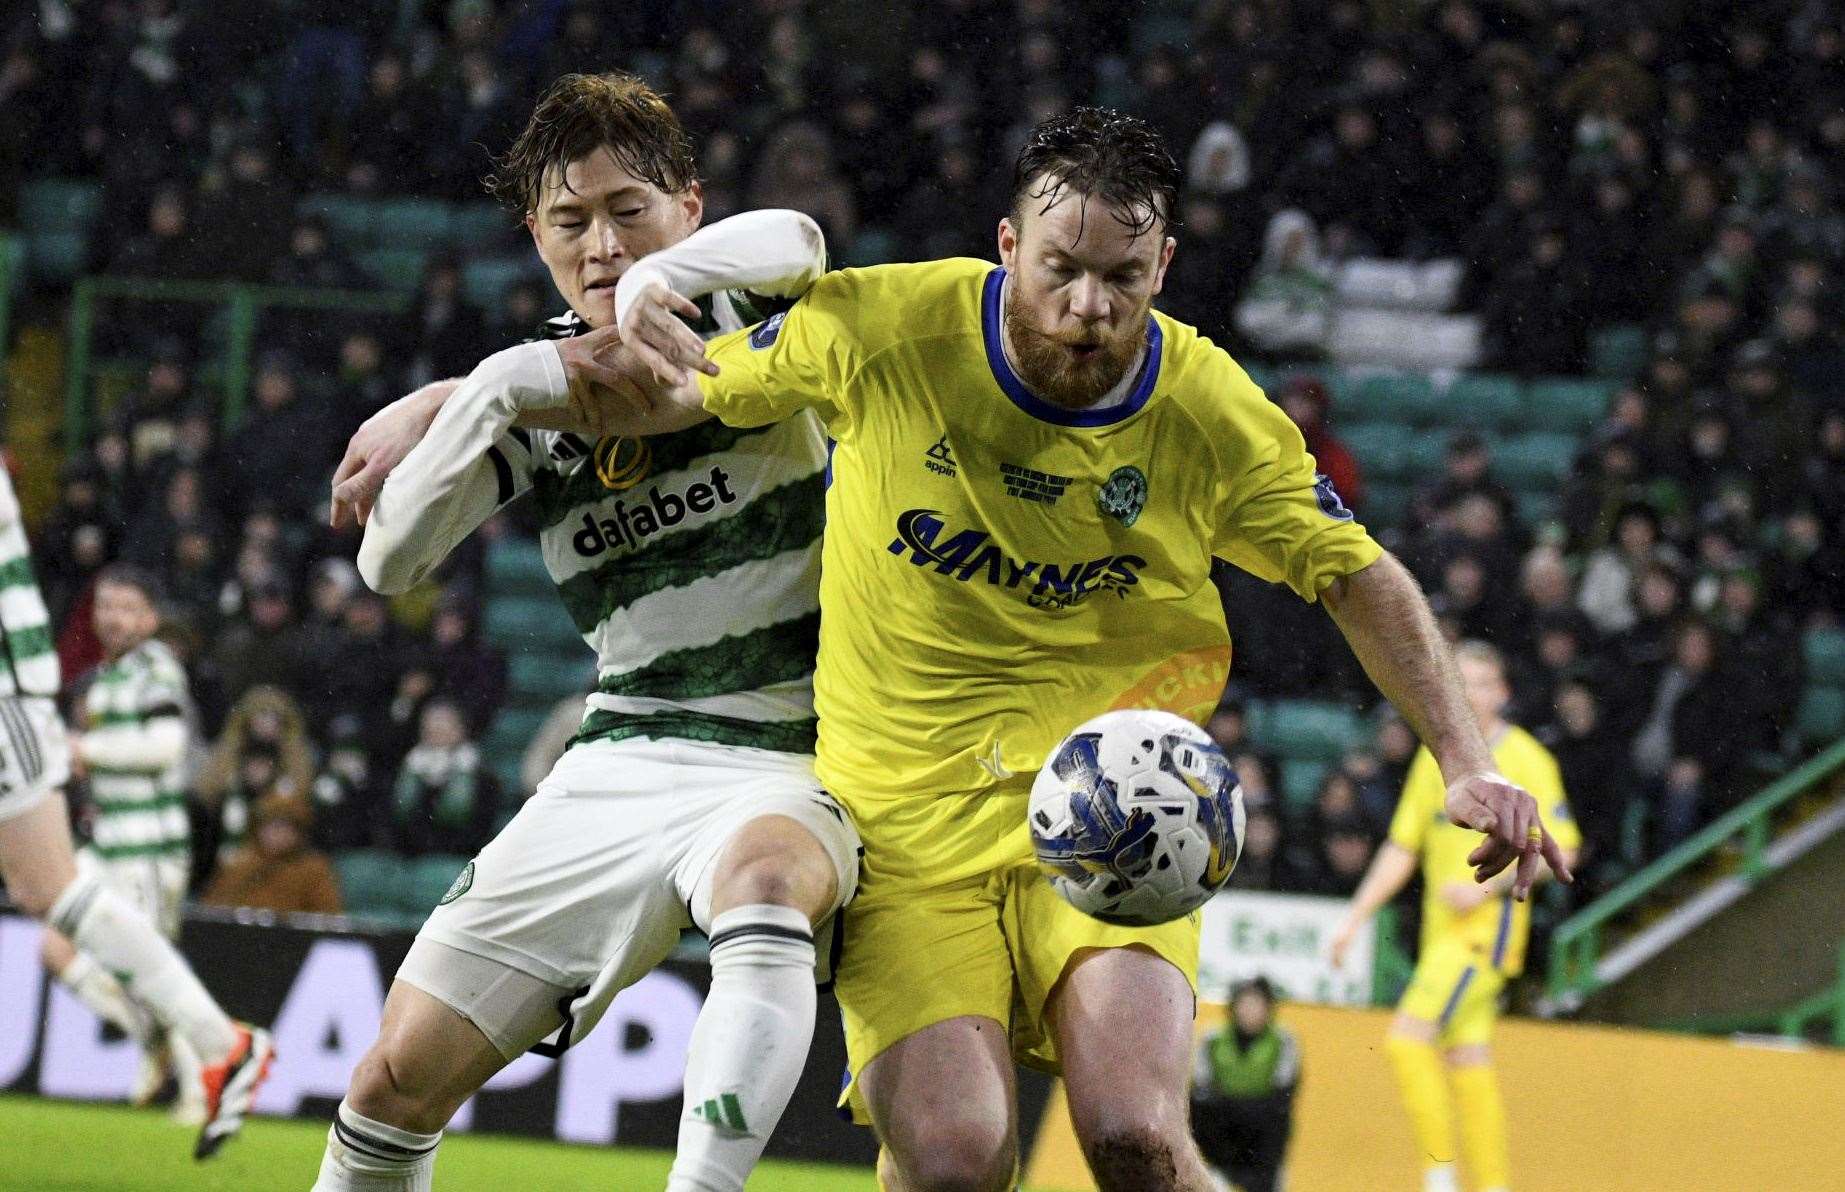 Buckie Thistle's Hamish Munro battles with Celtic's Kyogo Furuhashi. Picture: Daniel Forsyth